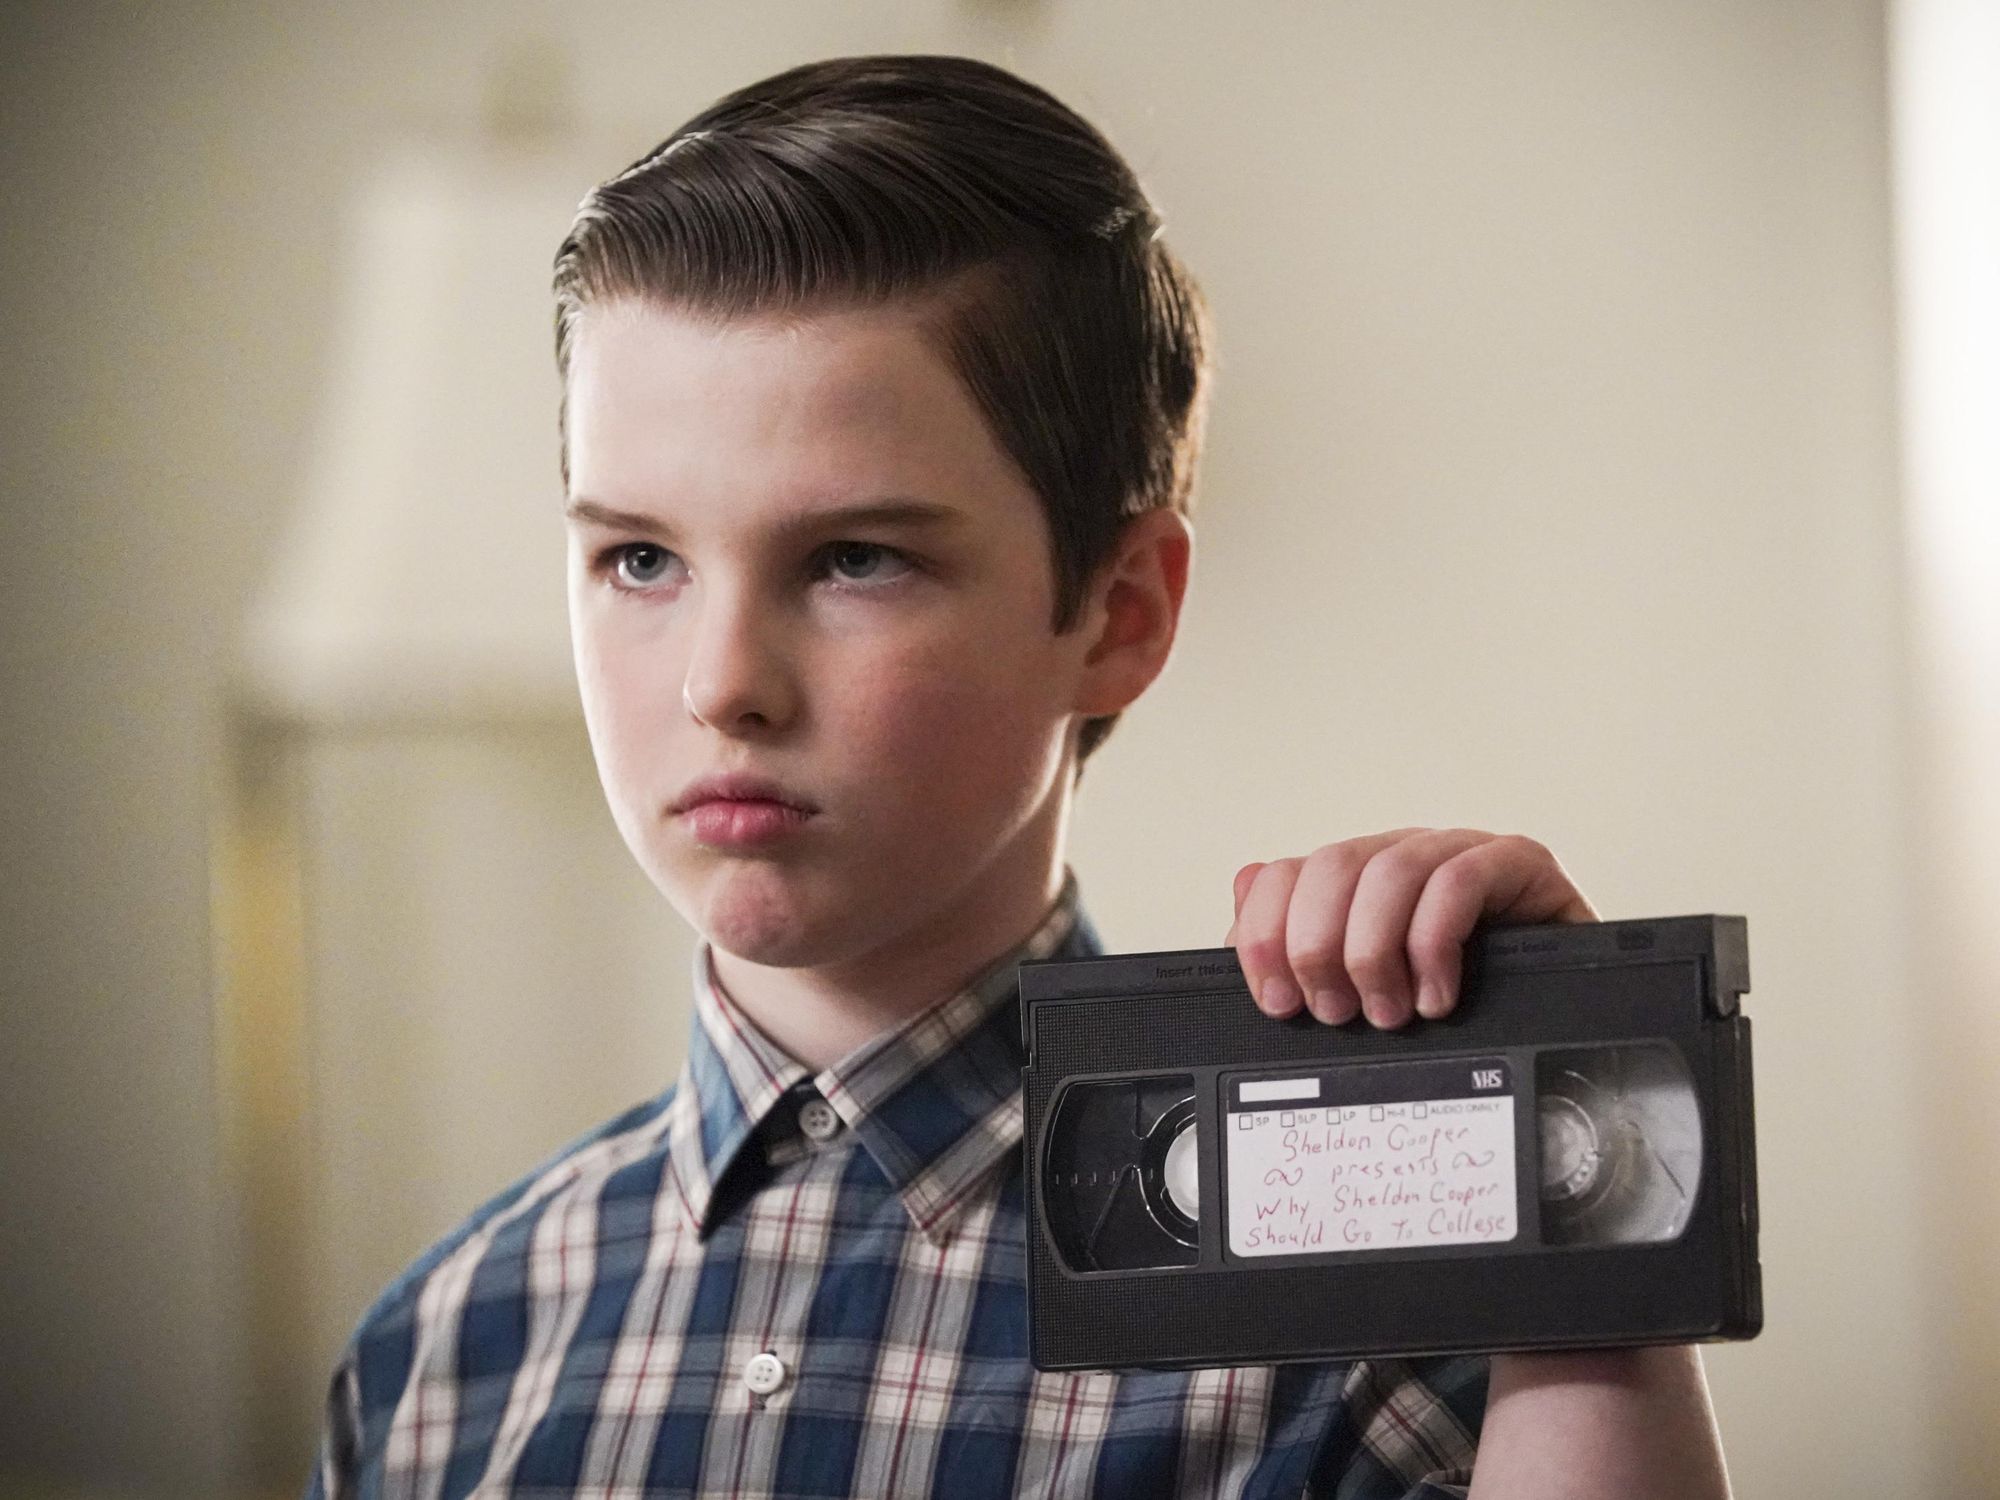 Young Sheldon looks stoic as he holds up a labeled videotape.